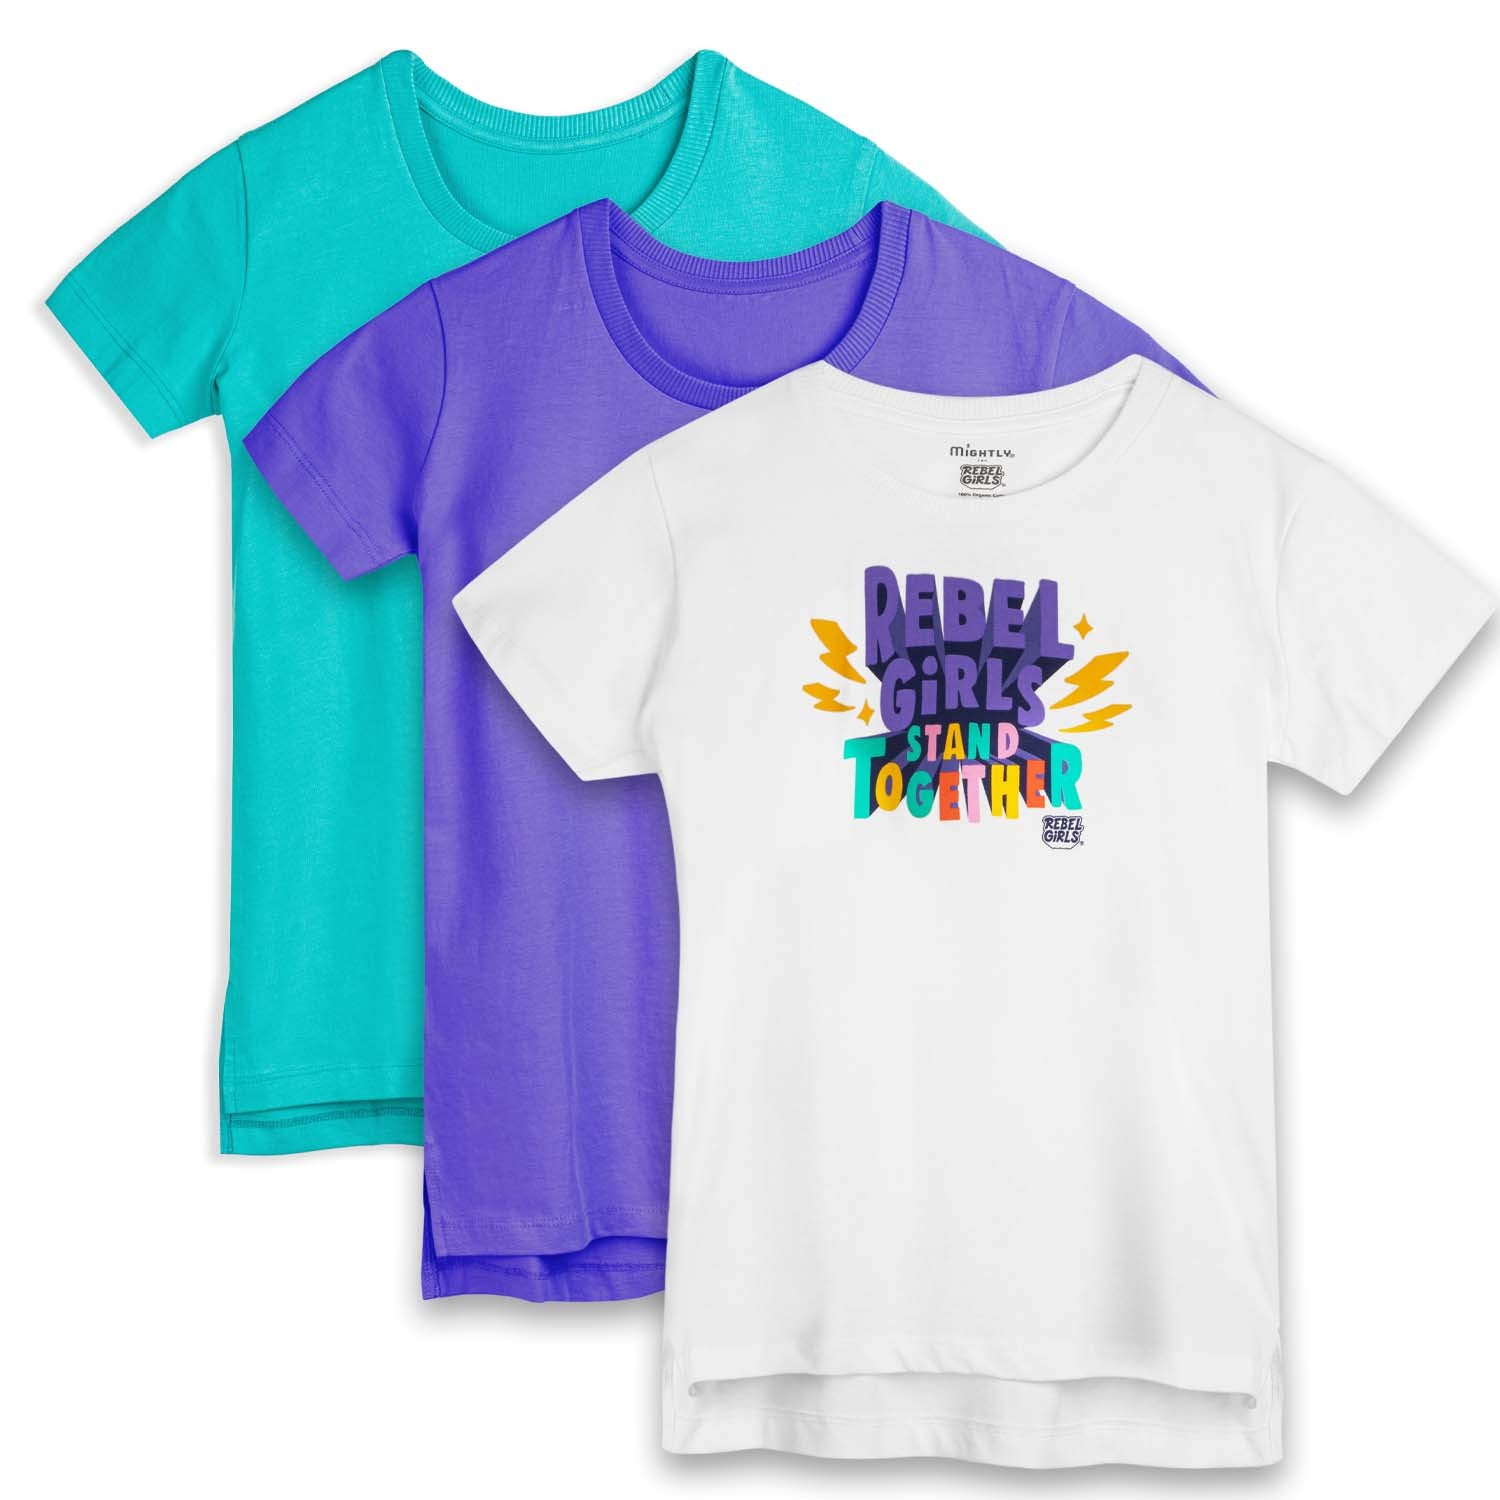 Organic Cotton Kids Shirts - Length Extended - Pack Mightly 3 T-Shirts